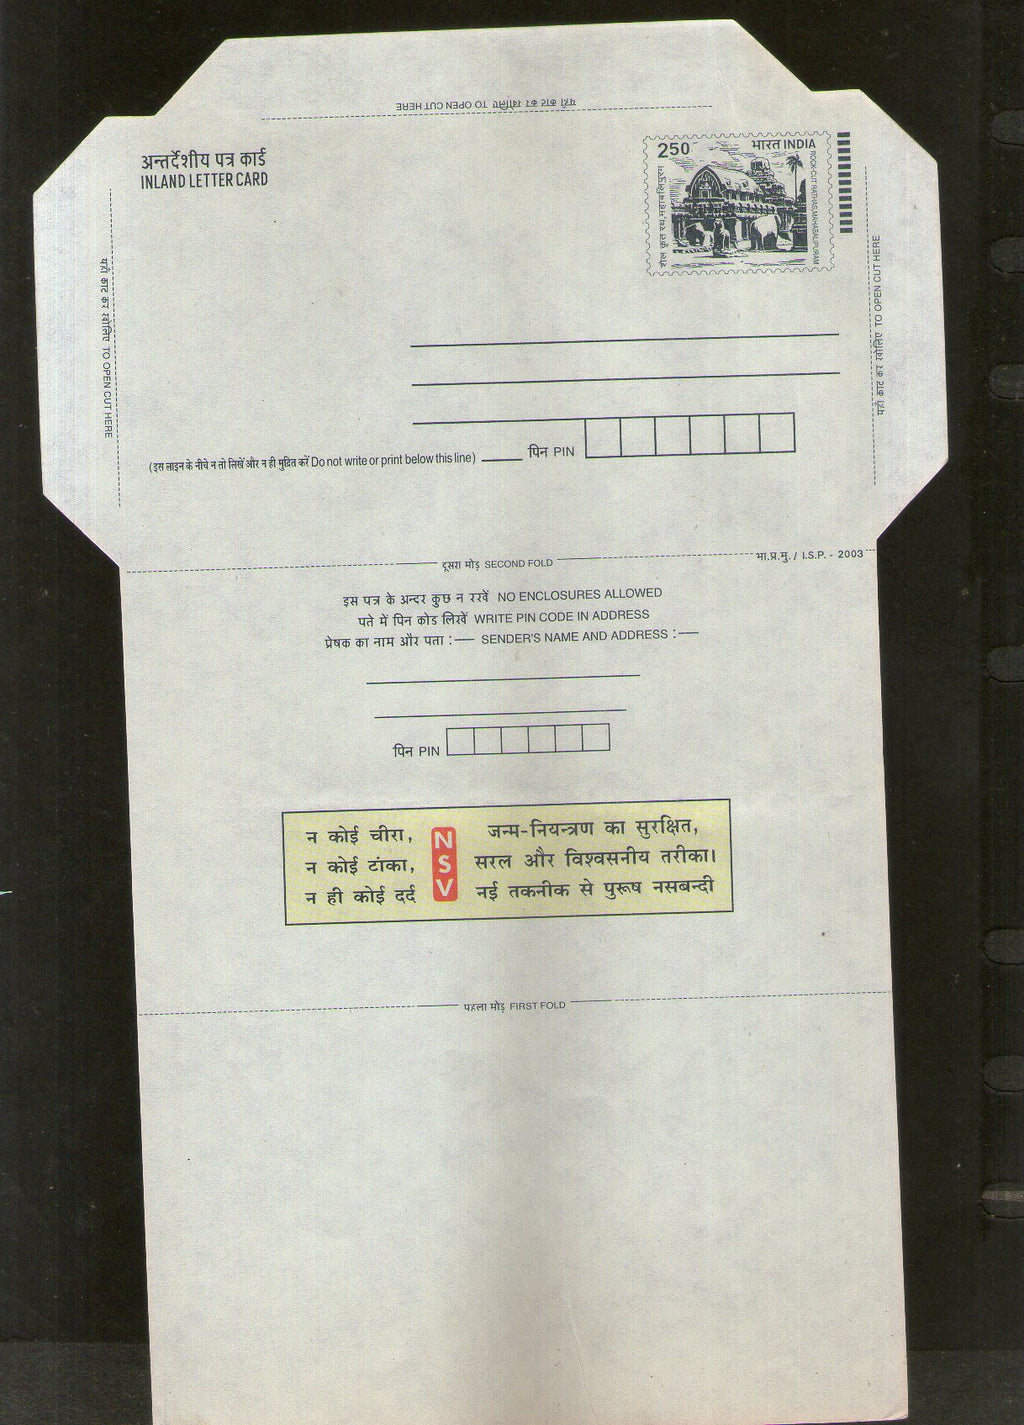 India 2003 2.50Rs Rath Inland Letter Card With Family Planning Advertisement ILC MINT # 795